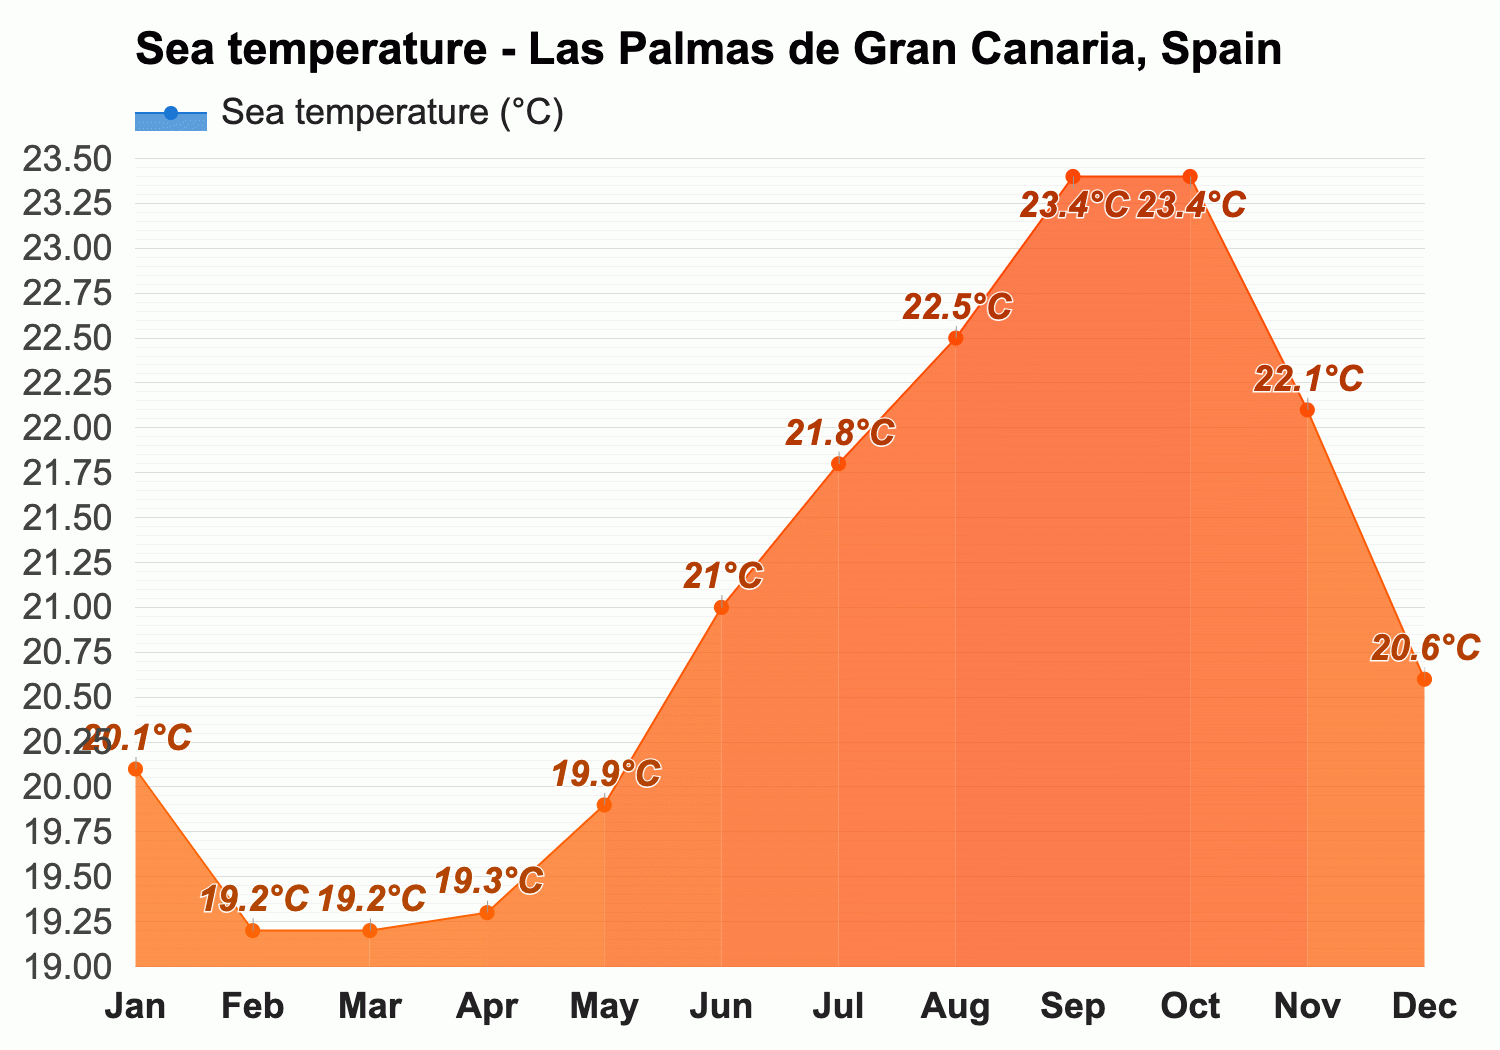 Las Palmas de Gran Canaria, Spain - Yearly & Monthly weather forecast